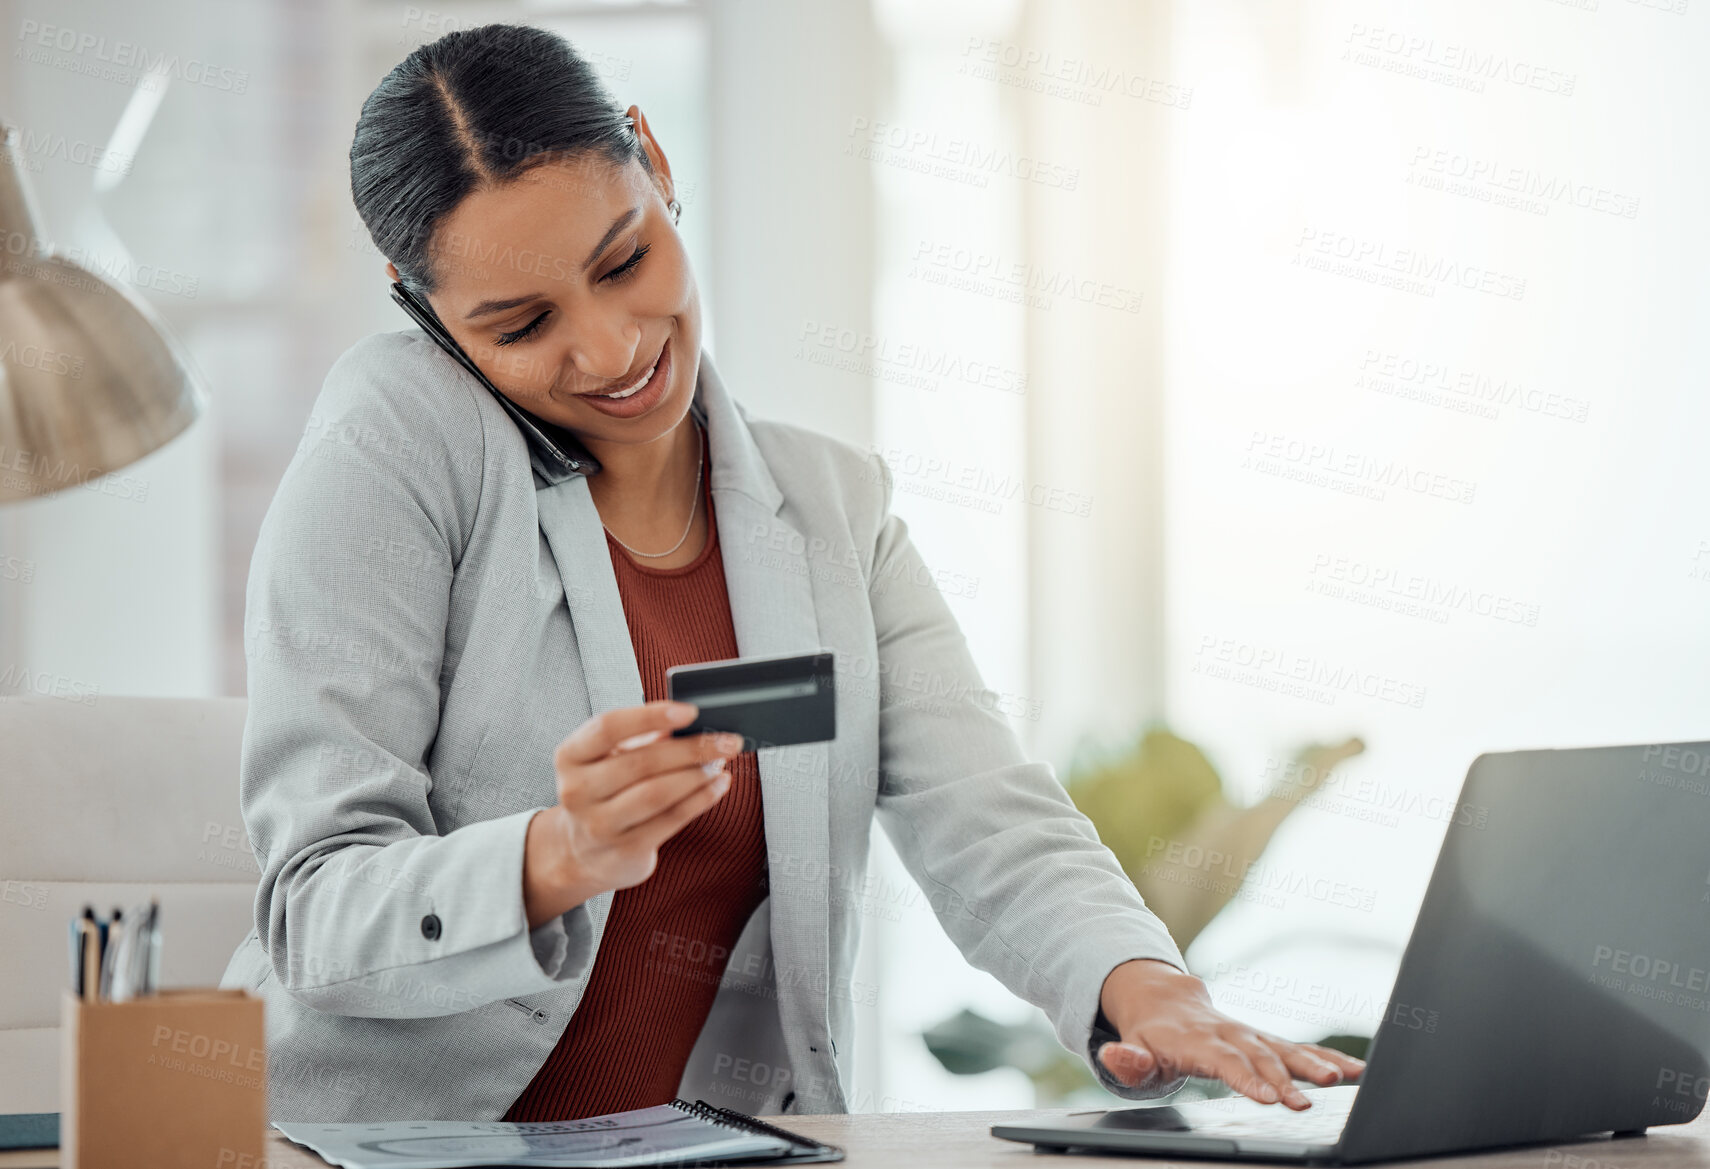 Buy stock photo Business woman calling on phone while shopping online, paying and buying products or items with a laptop at work. Cheerful, joyful and content businessperson getting great customer service